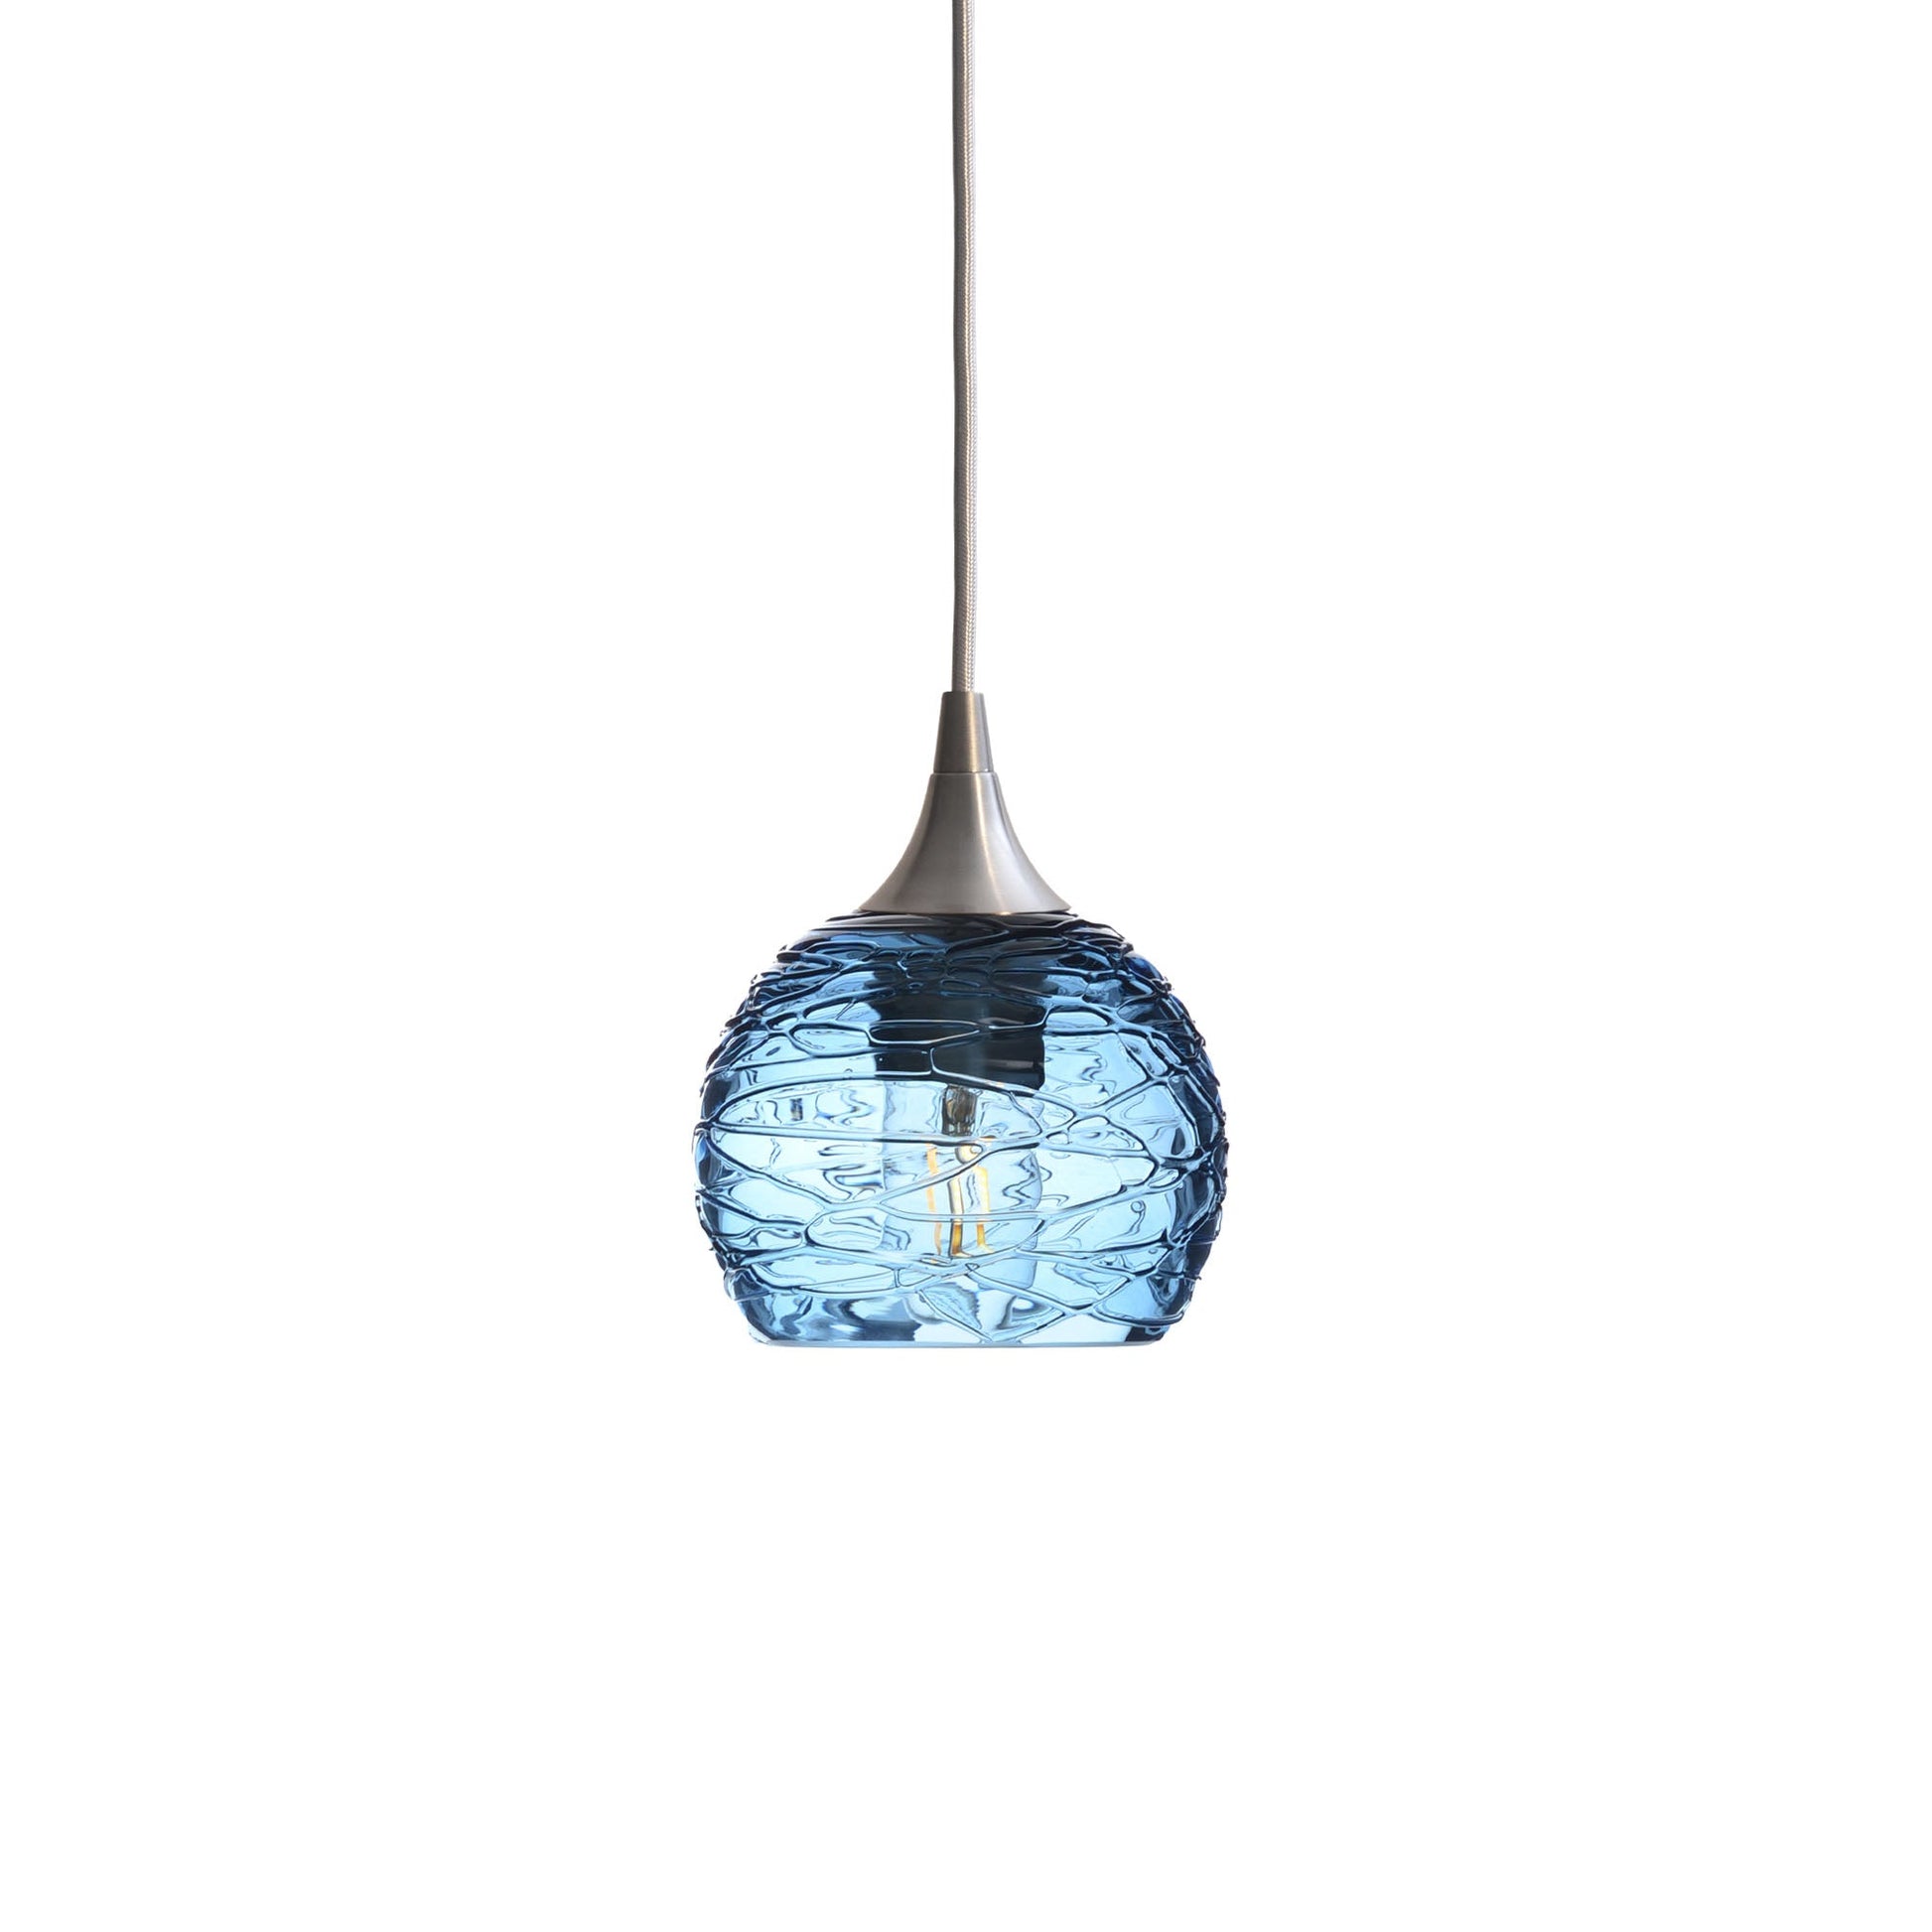 763 Spun: Single Pendant Light-Glass-Bicycle Glass Co - Hotshop-Steel Blue-Brushed Nickel-Bicycle Glass Co